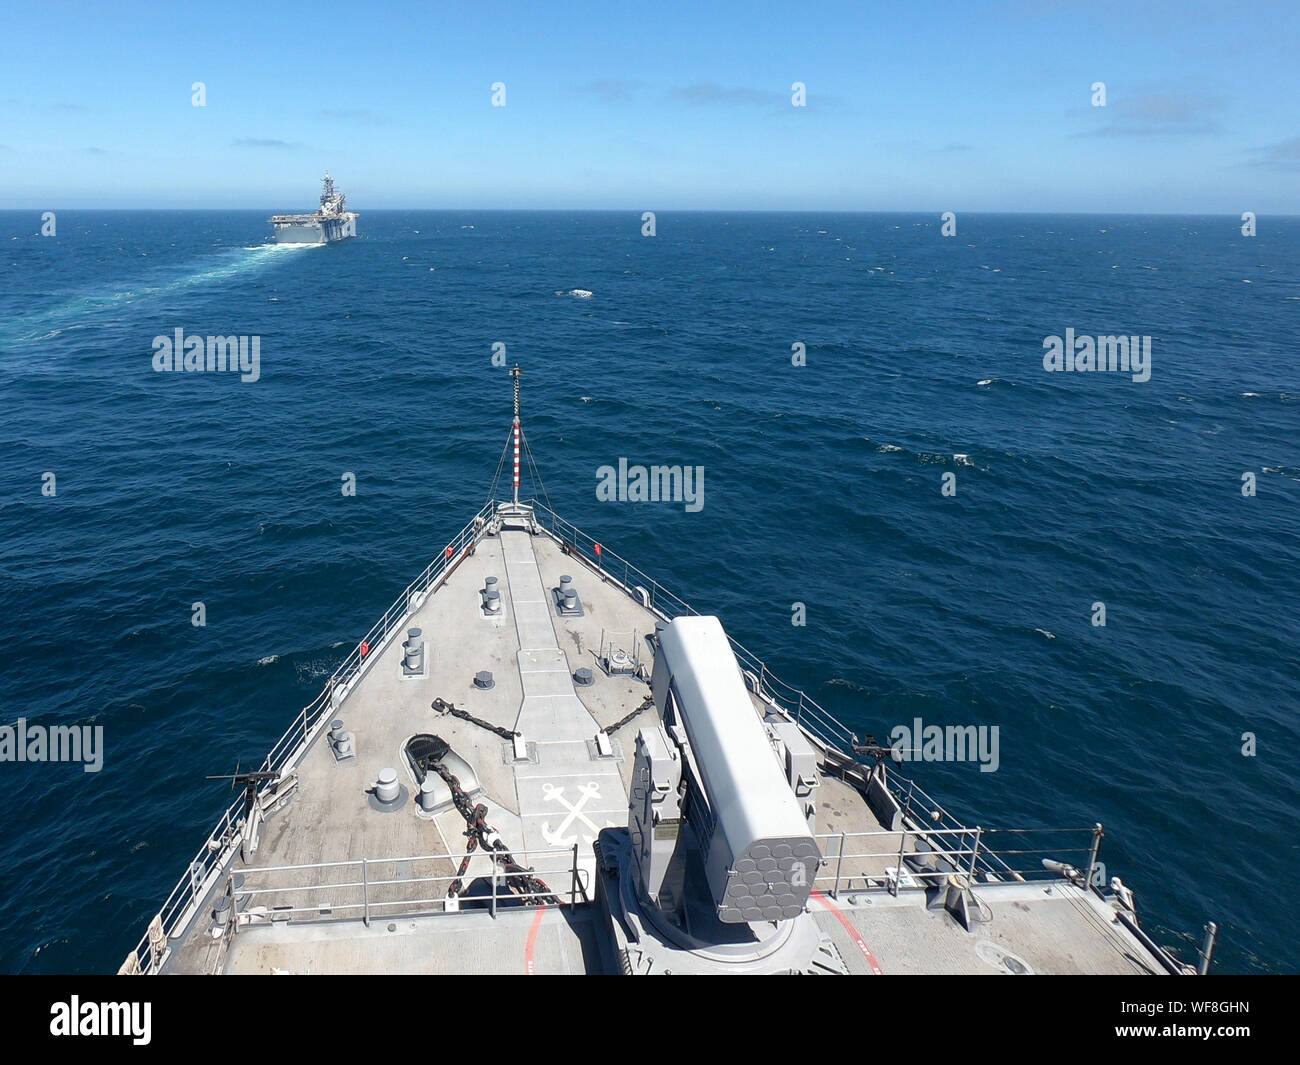 190820-N-XN177-0198 PACIFIC OCEAN (Aug. 20, 2019) –The dock landing ship USS Comstock (LSD 45) prepares to come along side amphibious assault ship USS America (LHA 6) during a replenishment at sea evolution. Comstock is currently underway conducting routine operations. This year USS Comstock will participate in the U.S. Navy Fleet Week in Los Angeles. (U.S. Navy Photo by Mass Communication Specialist 1st Class Peter Burghart/Released) Stock Photo